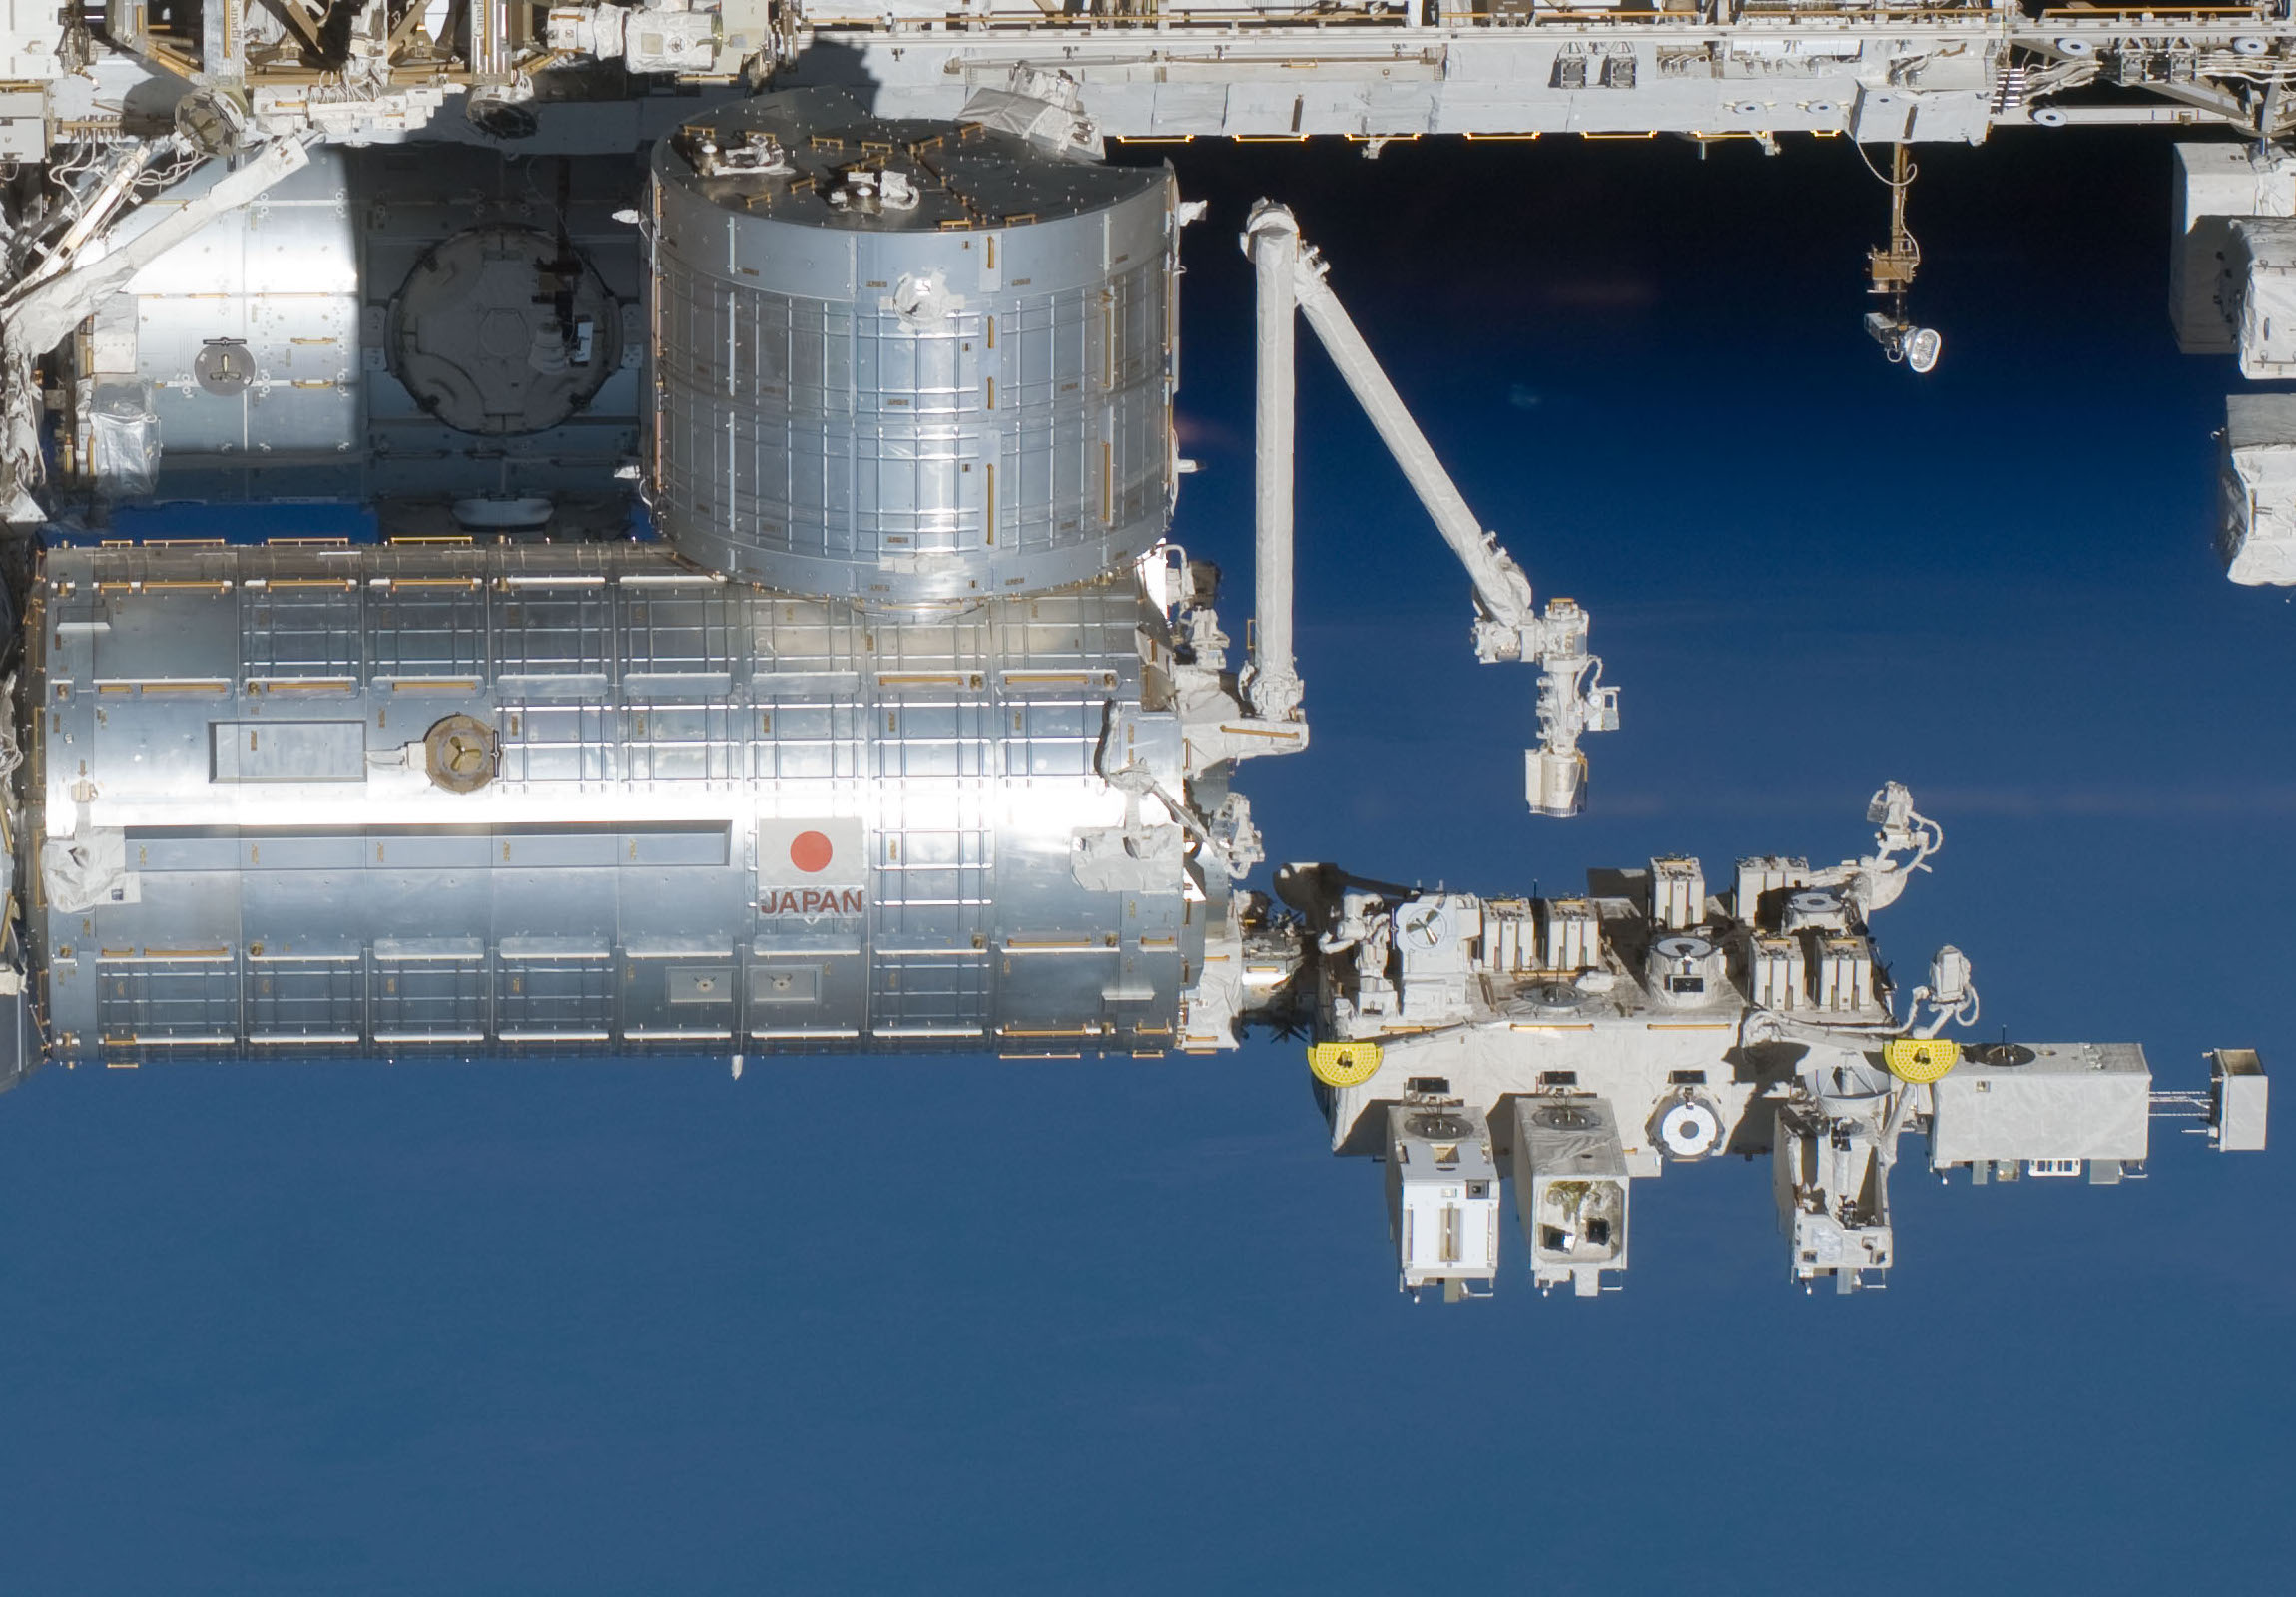 Learning How Microbes Live In Space